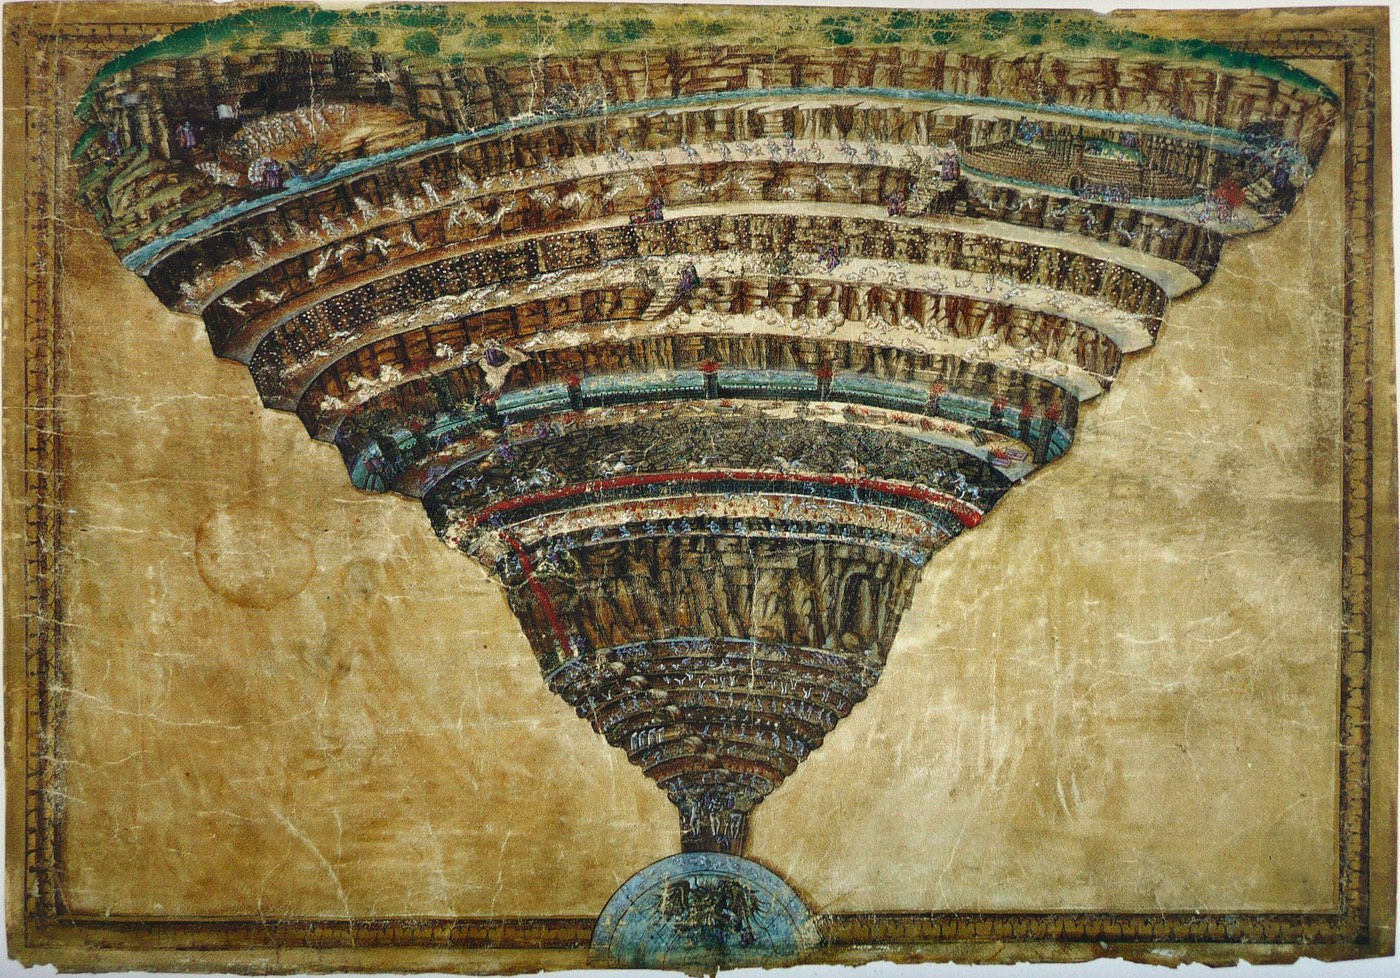 The Map of Hell by Sandro Botticelli.